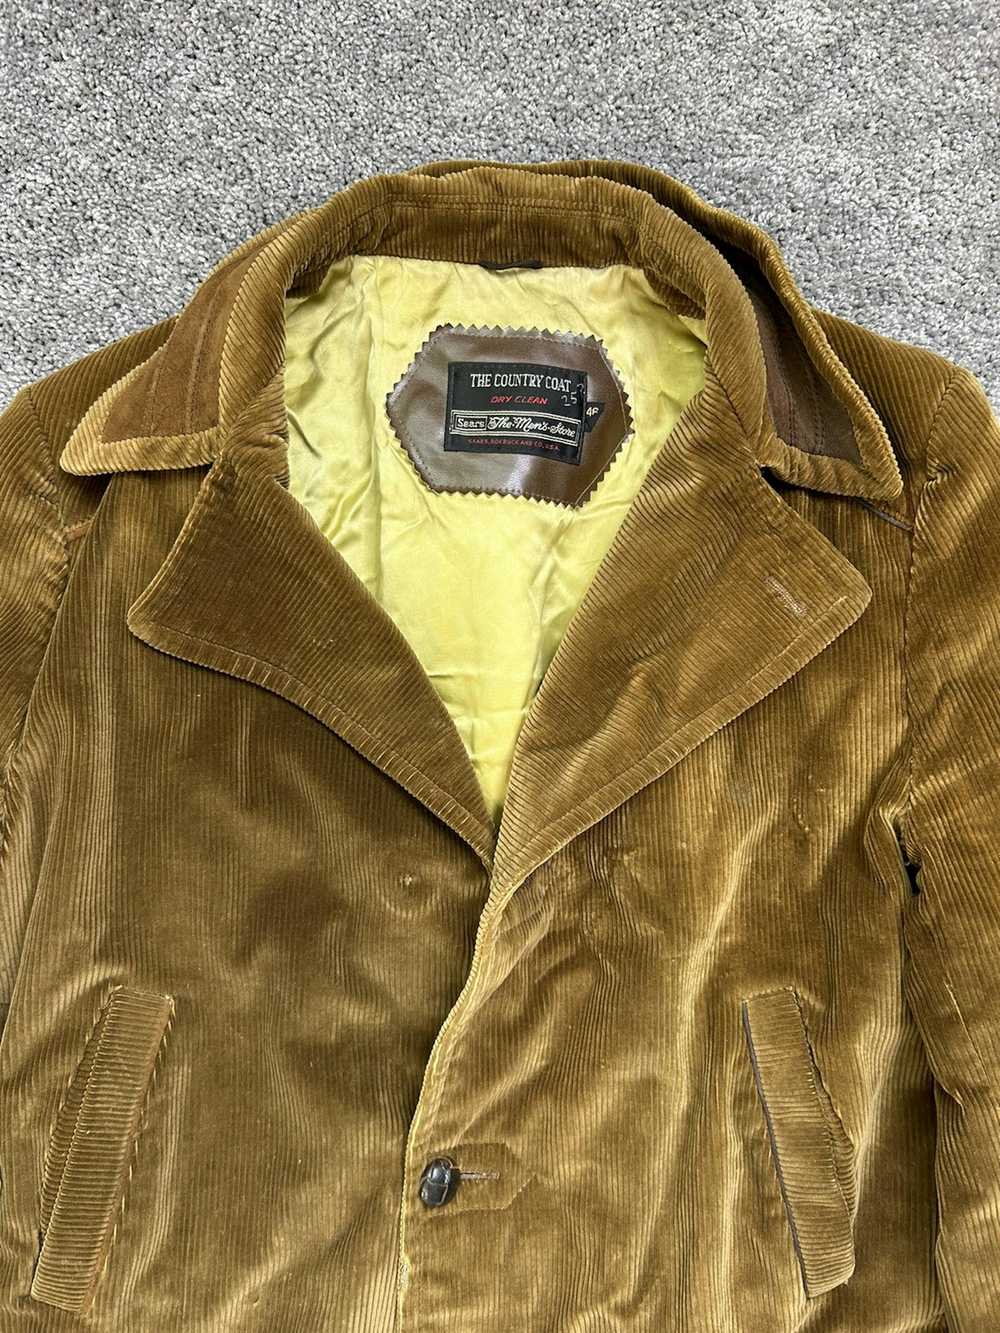 Sears × Vintage Vintage 70s Sears Country Coat Co… - image 2